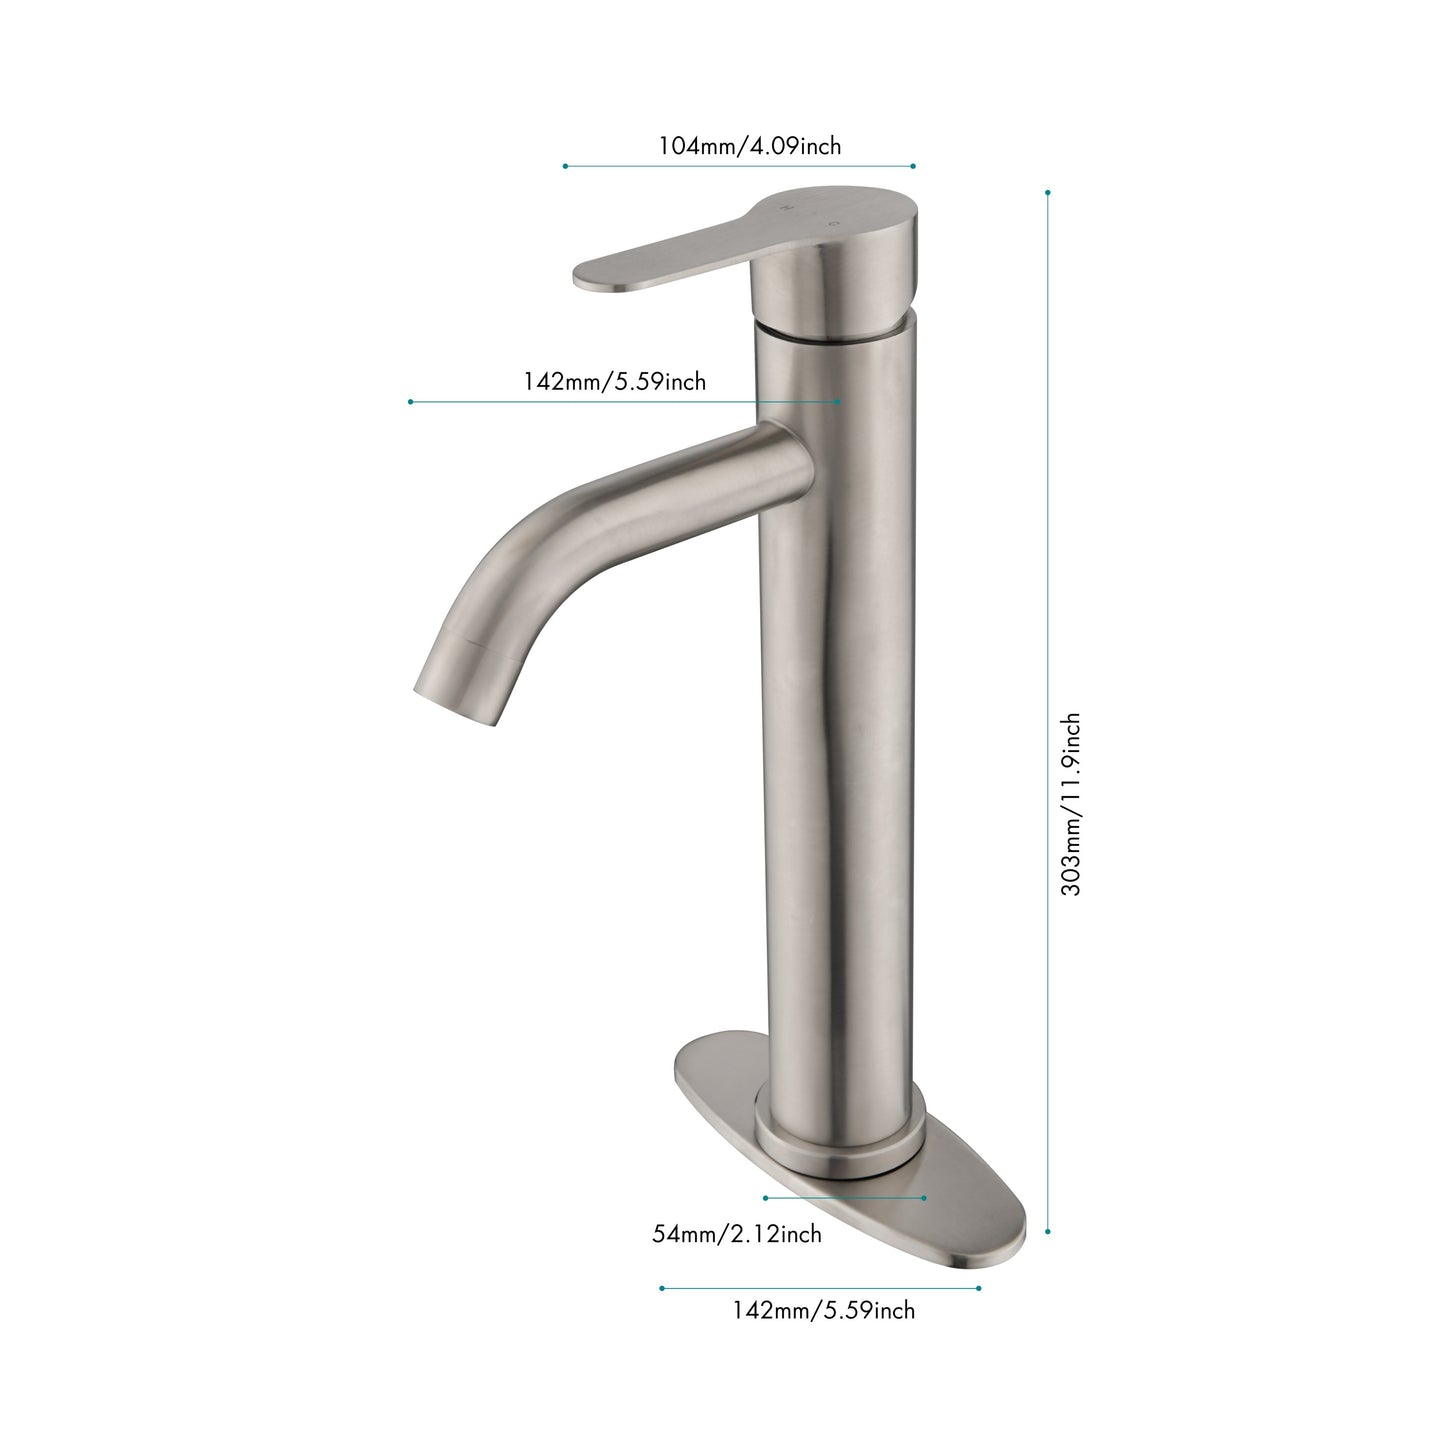 Waterfall Spout Bathroom Faucet with Single-Handle Design